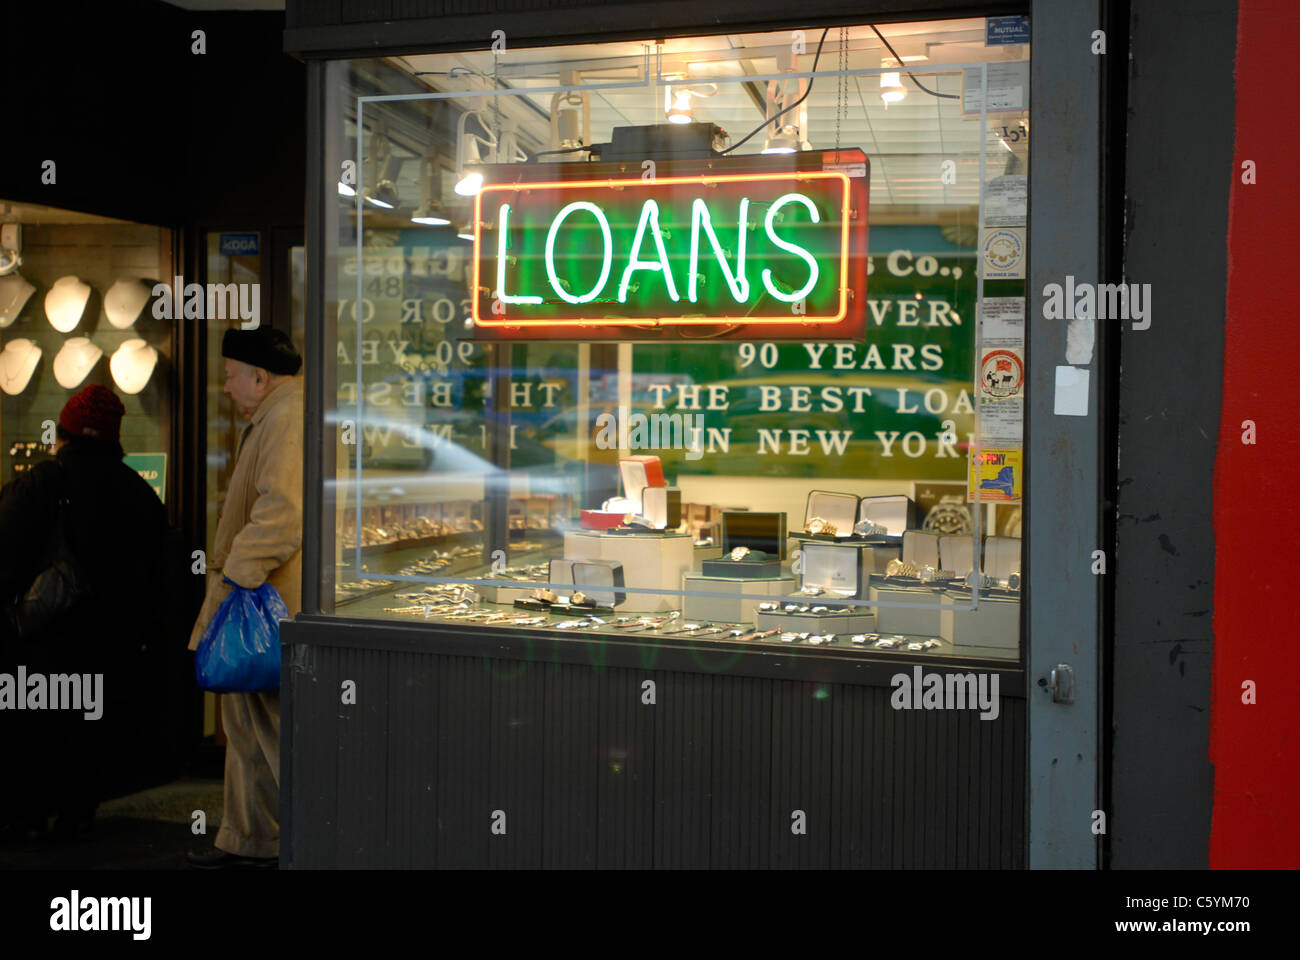 Pawnbroker in New York is seen on Tuesday, January 6, 2009 Stock Photo